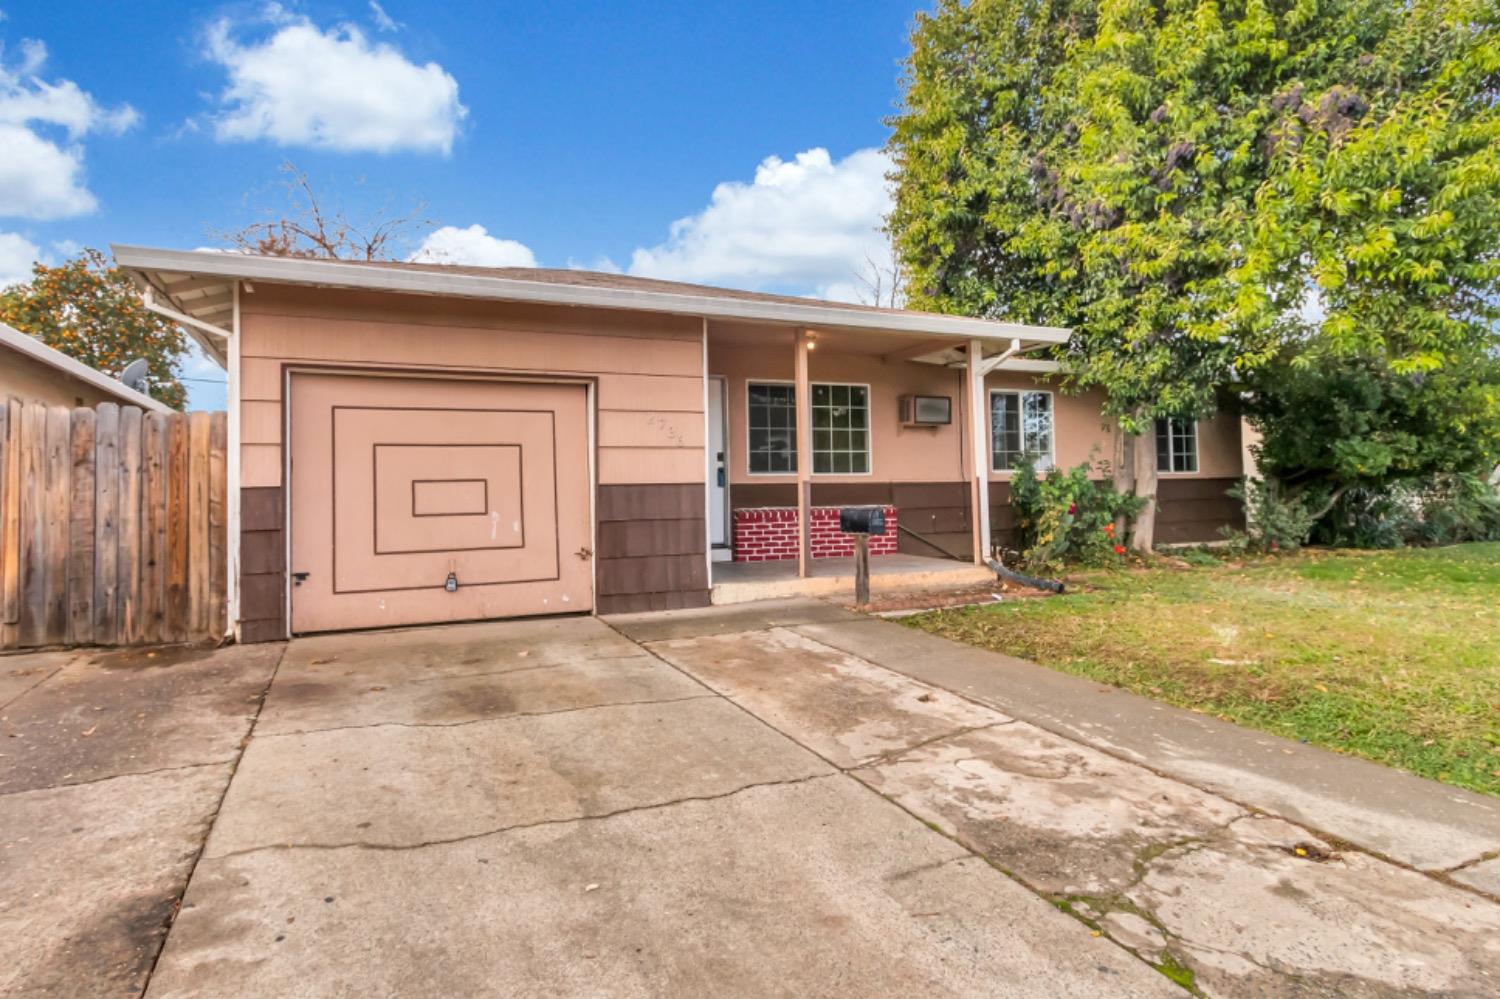 Looking for a spacious updated home in an amazing location? This Sacramento home has a remodeled kit